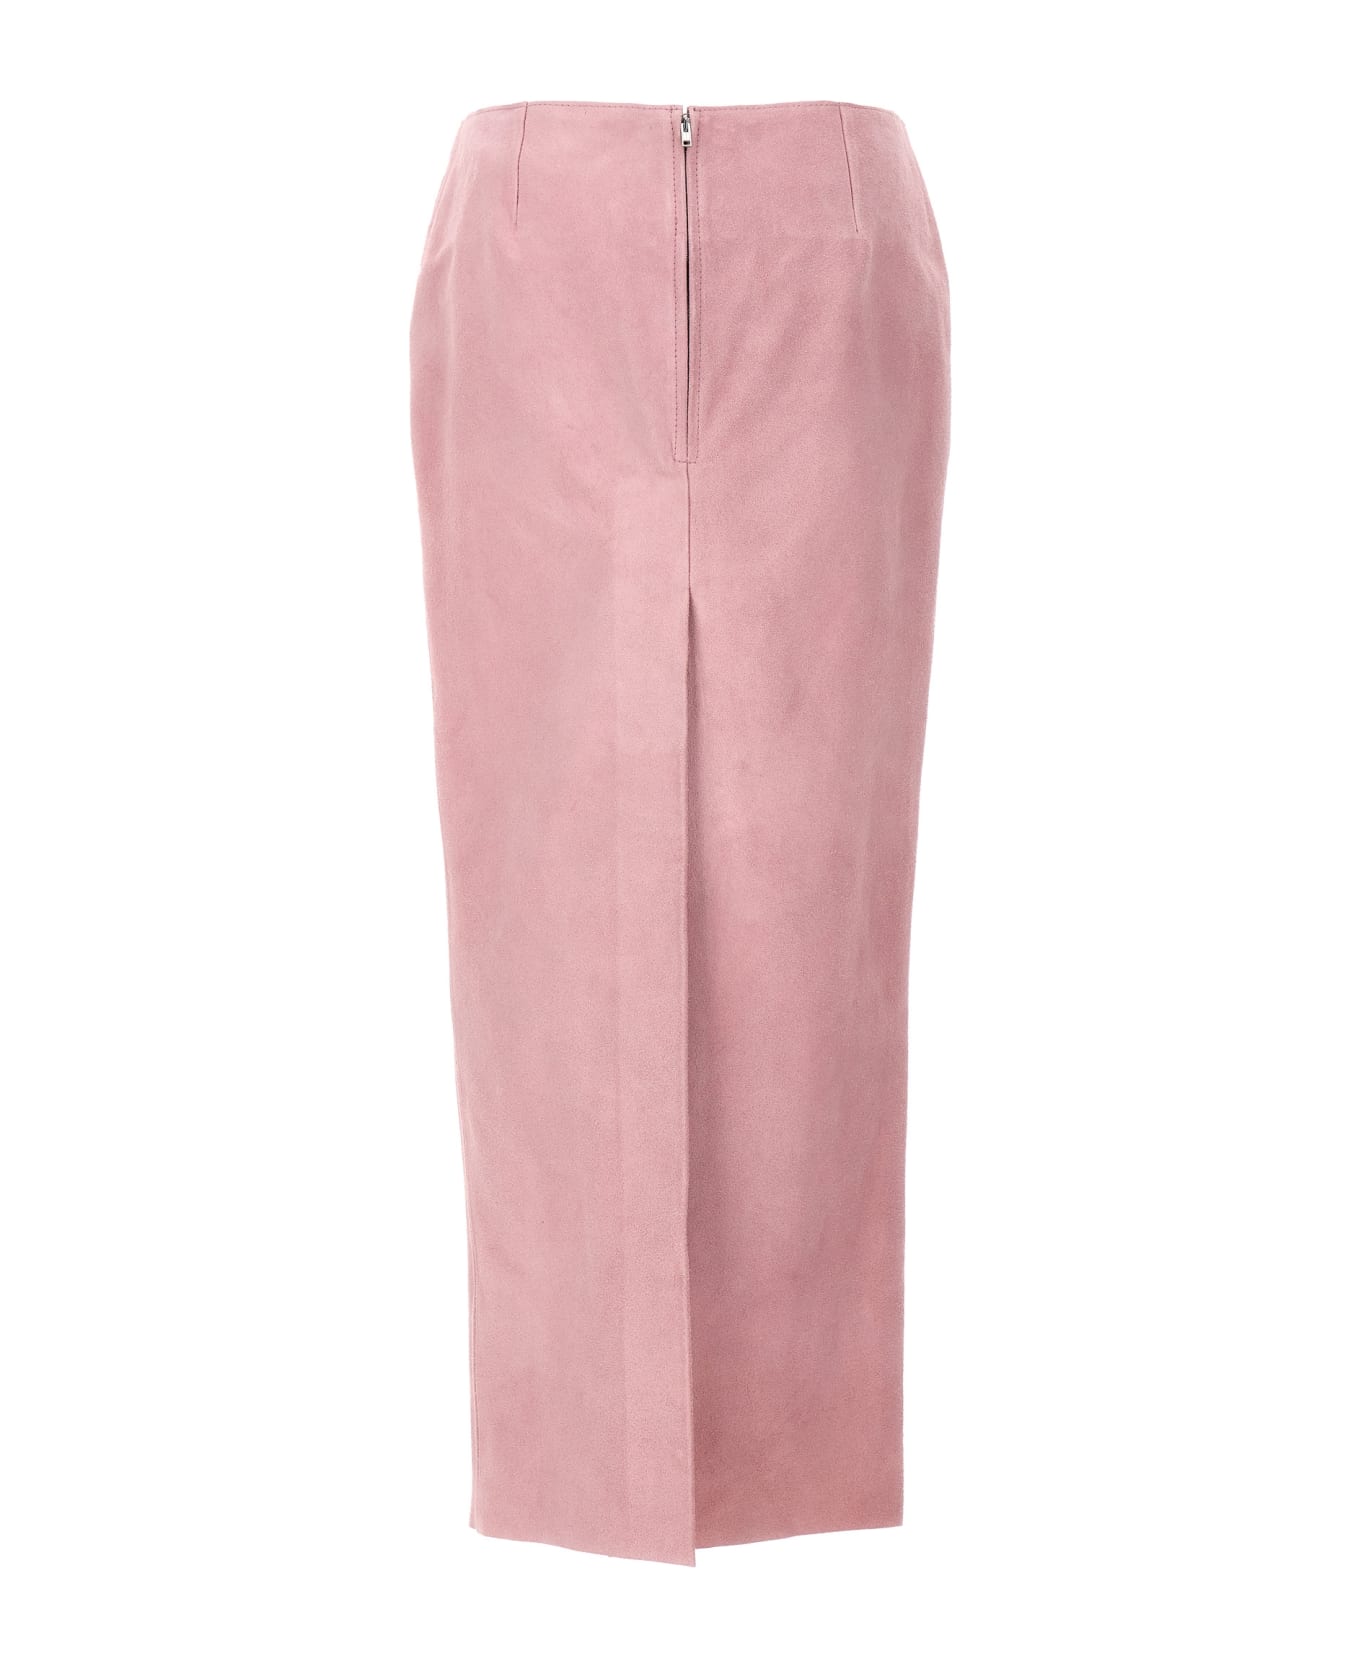 Marni Suede Maxi Skirt - Pink